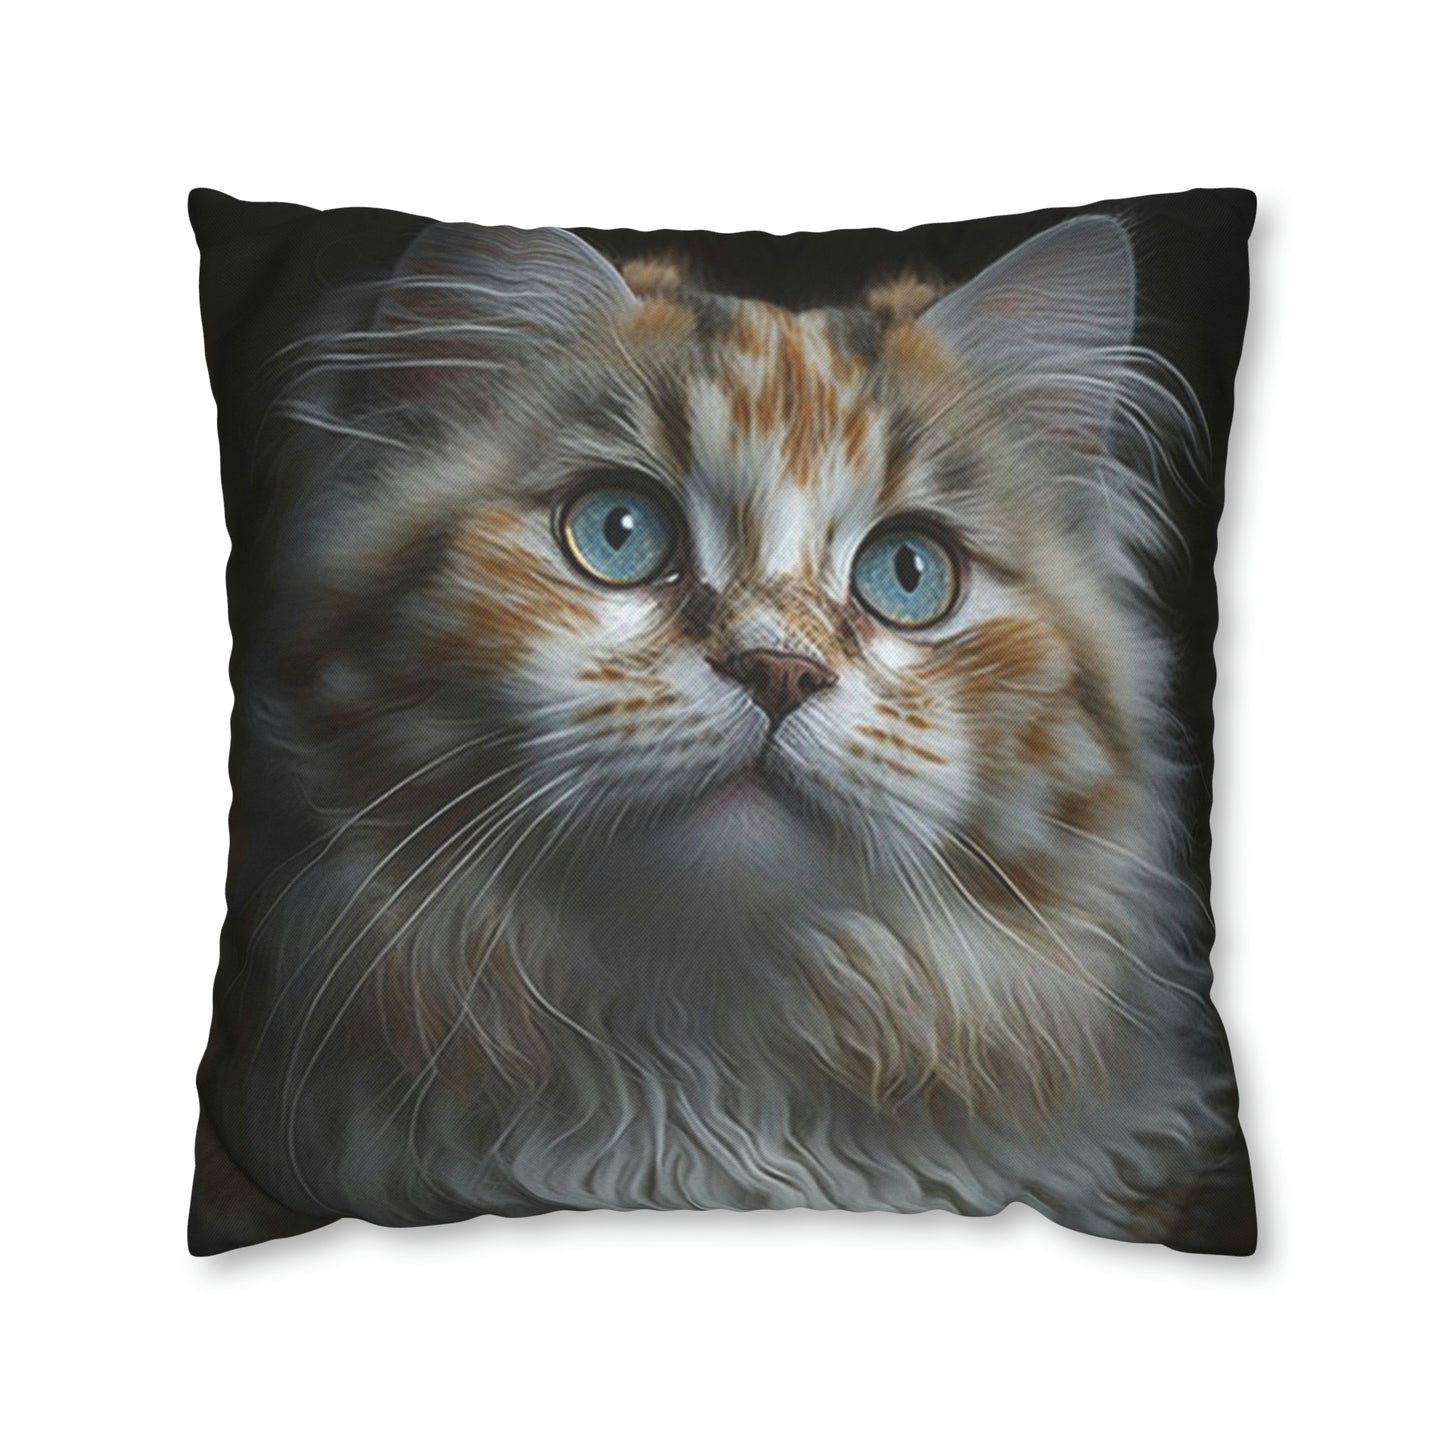 Cat PillowCase Square Faux Suede Beautiful High Quality Spun Polyester Square Cat PillowCase